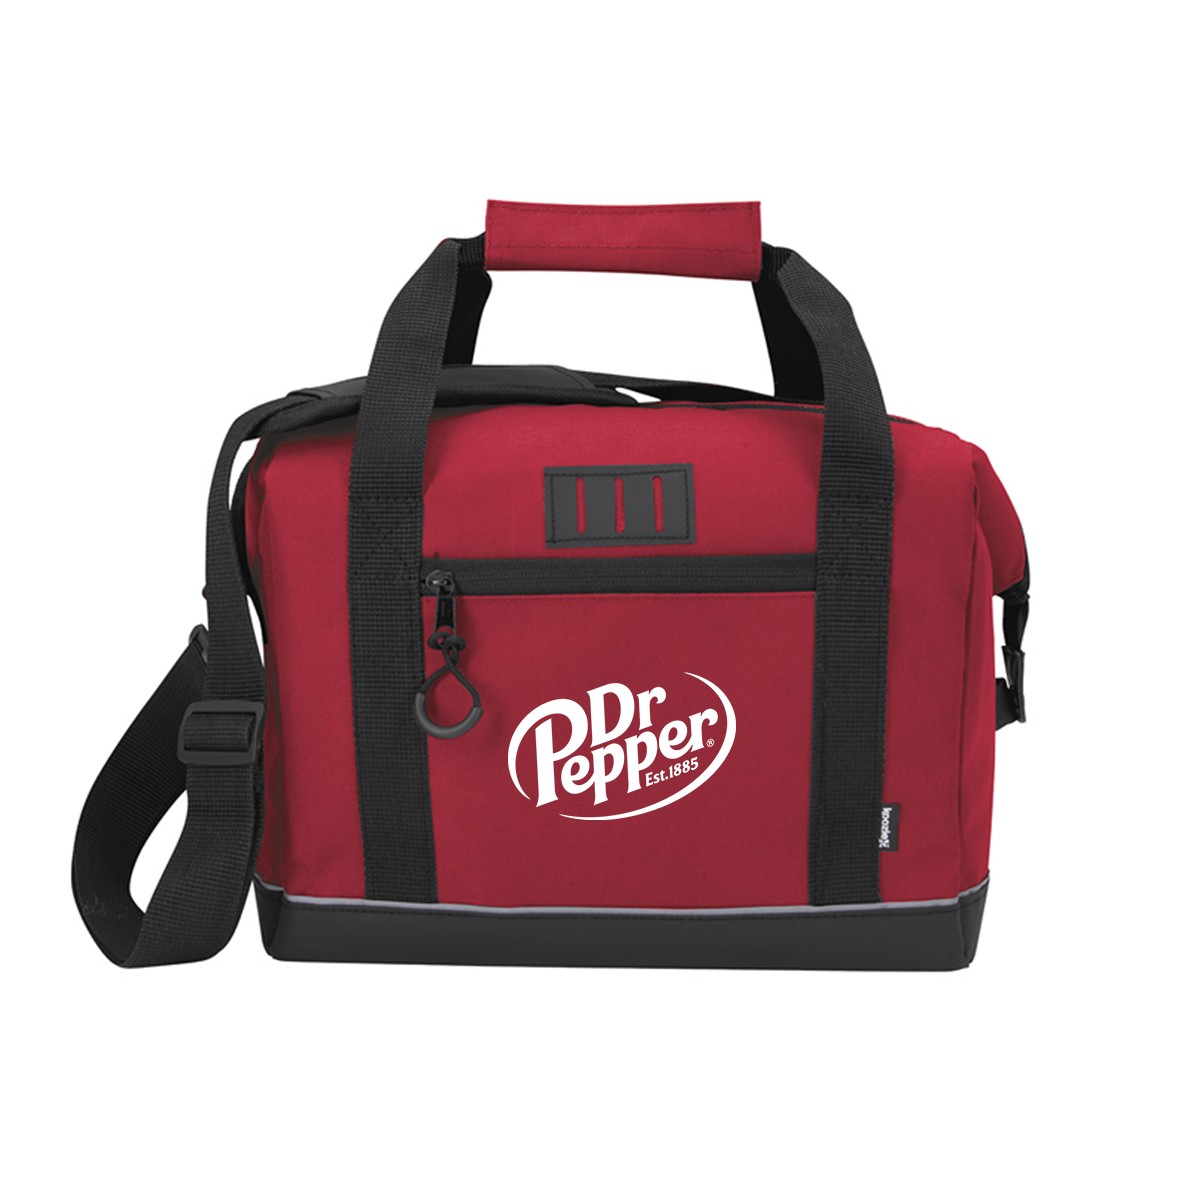 https://www.drpepperstore.com/store/20210906459/assets/items/largeimages/DPE0045.jpg